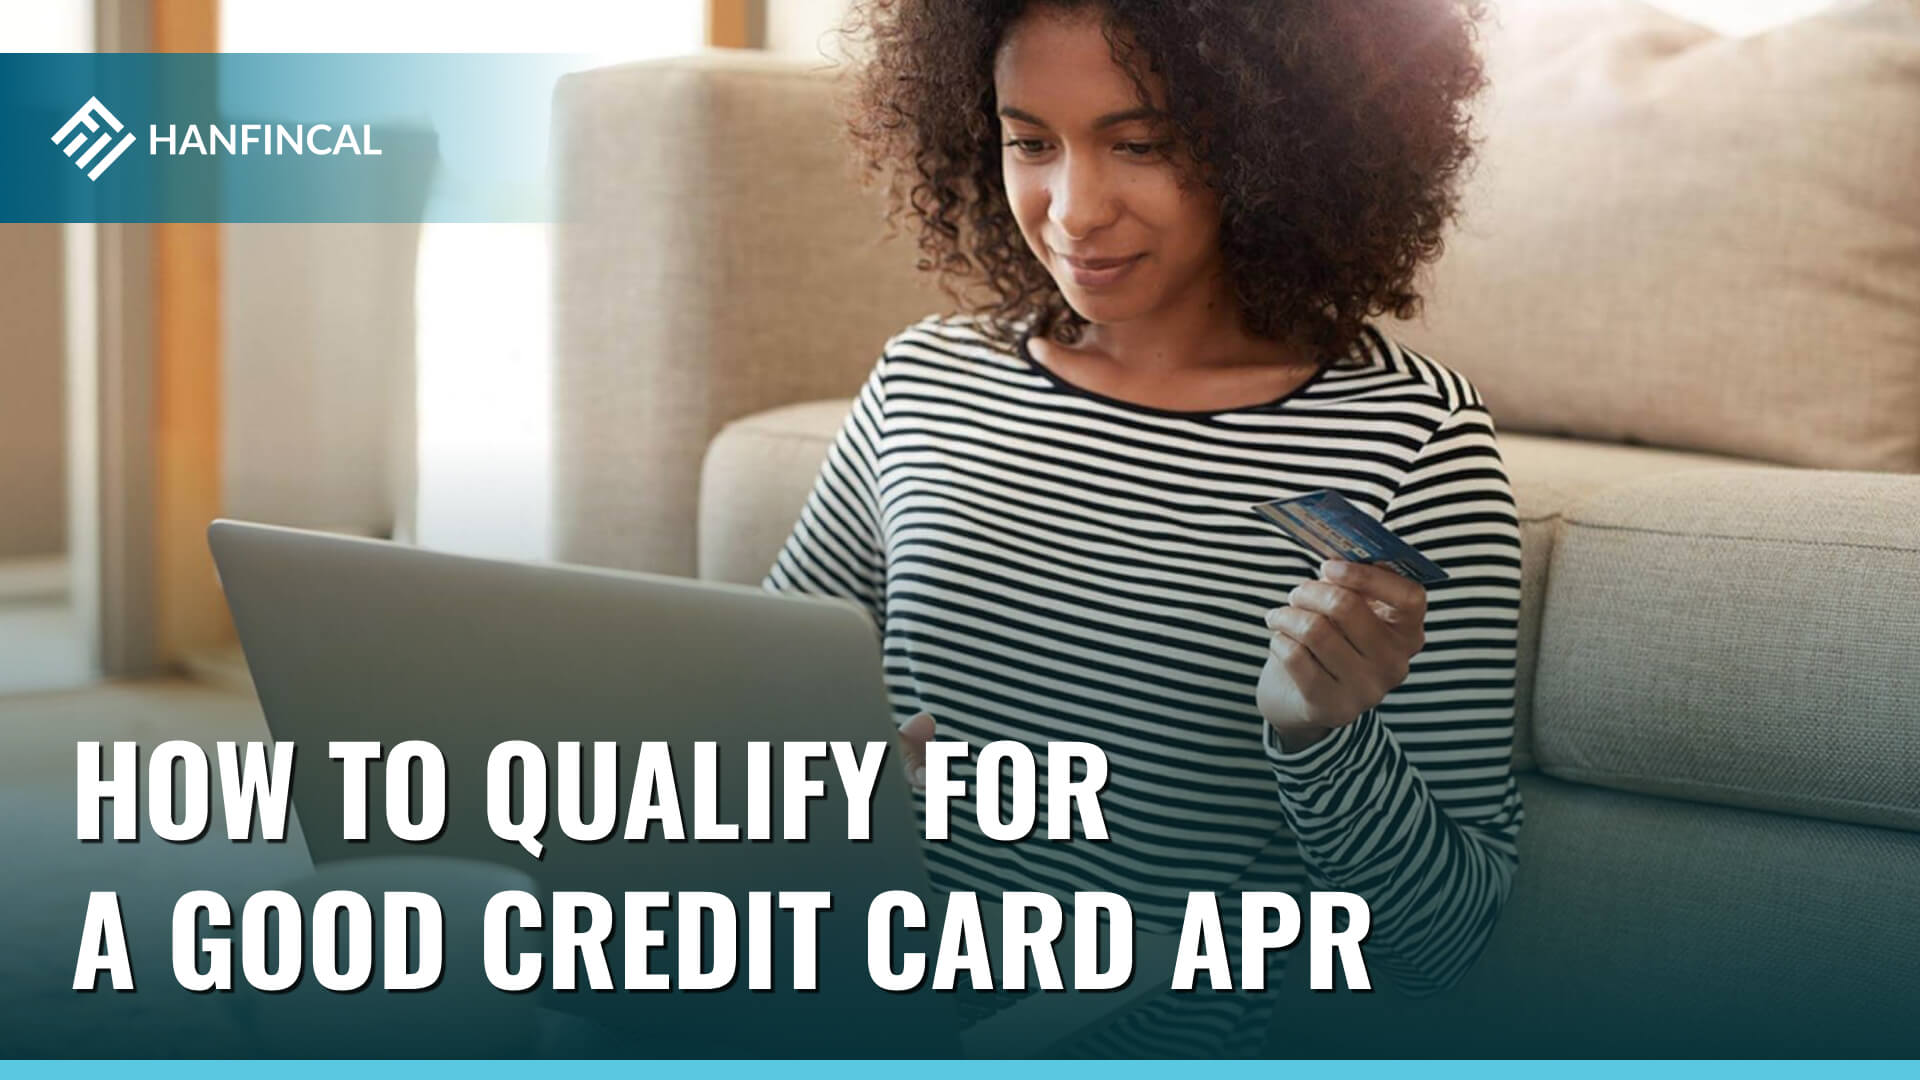 How to qualify for a good credit card APR?